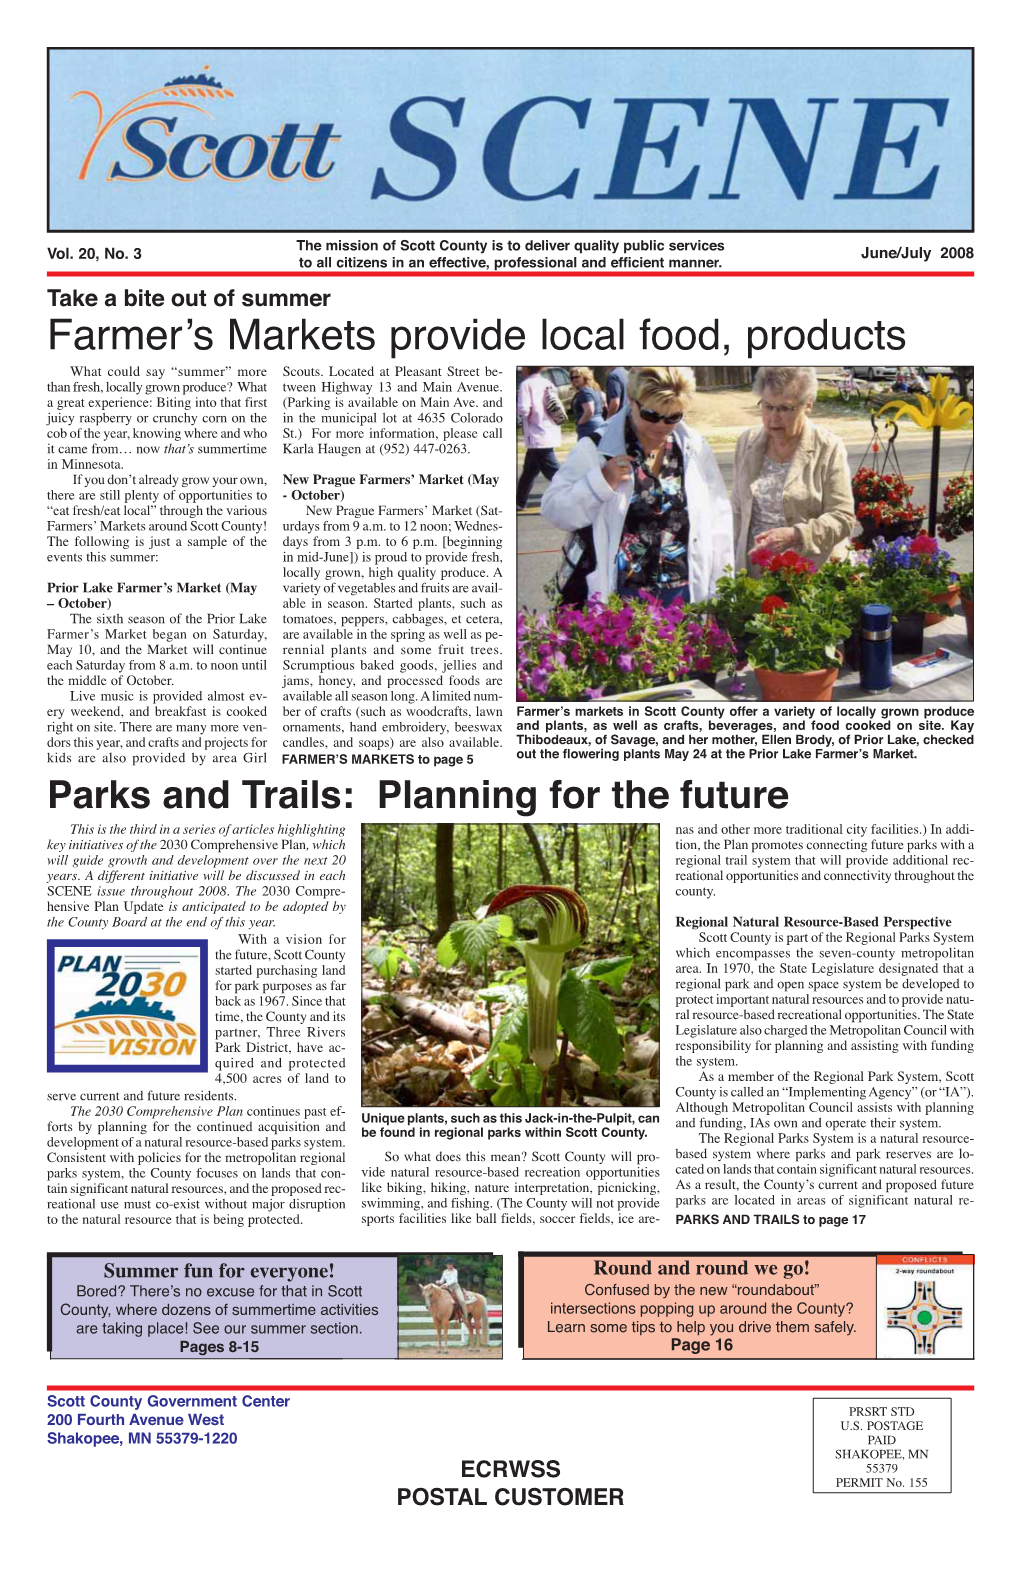 Farmer's Markets Provide Local Food, Products